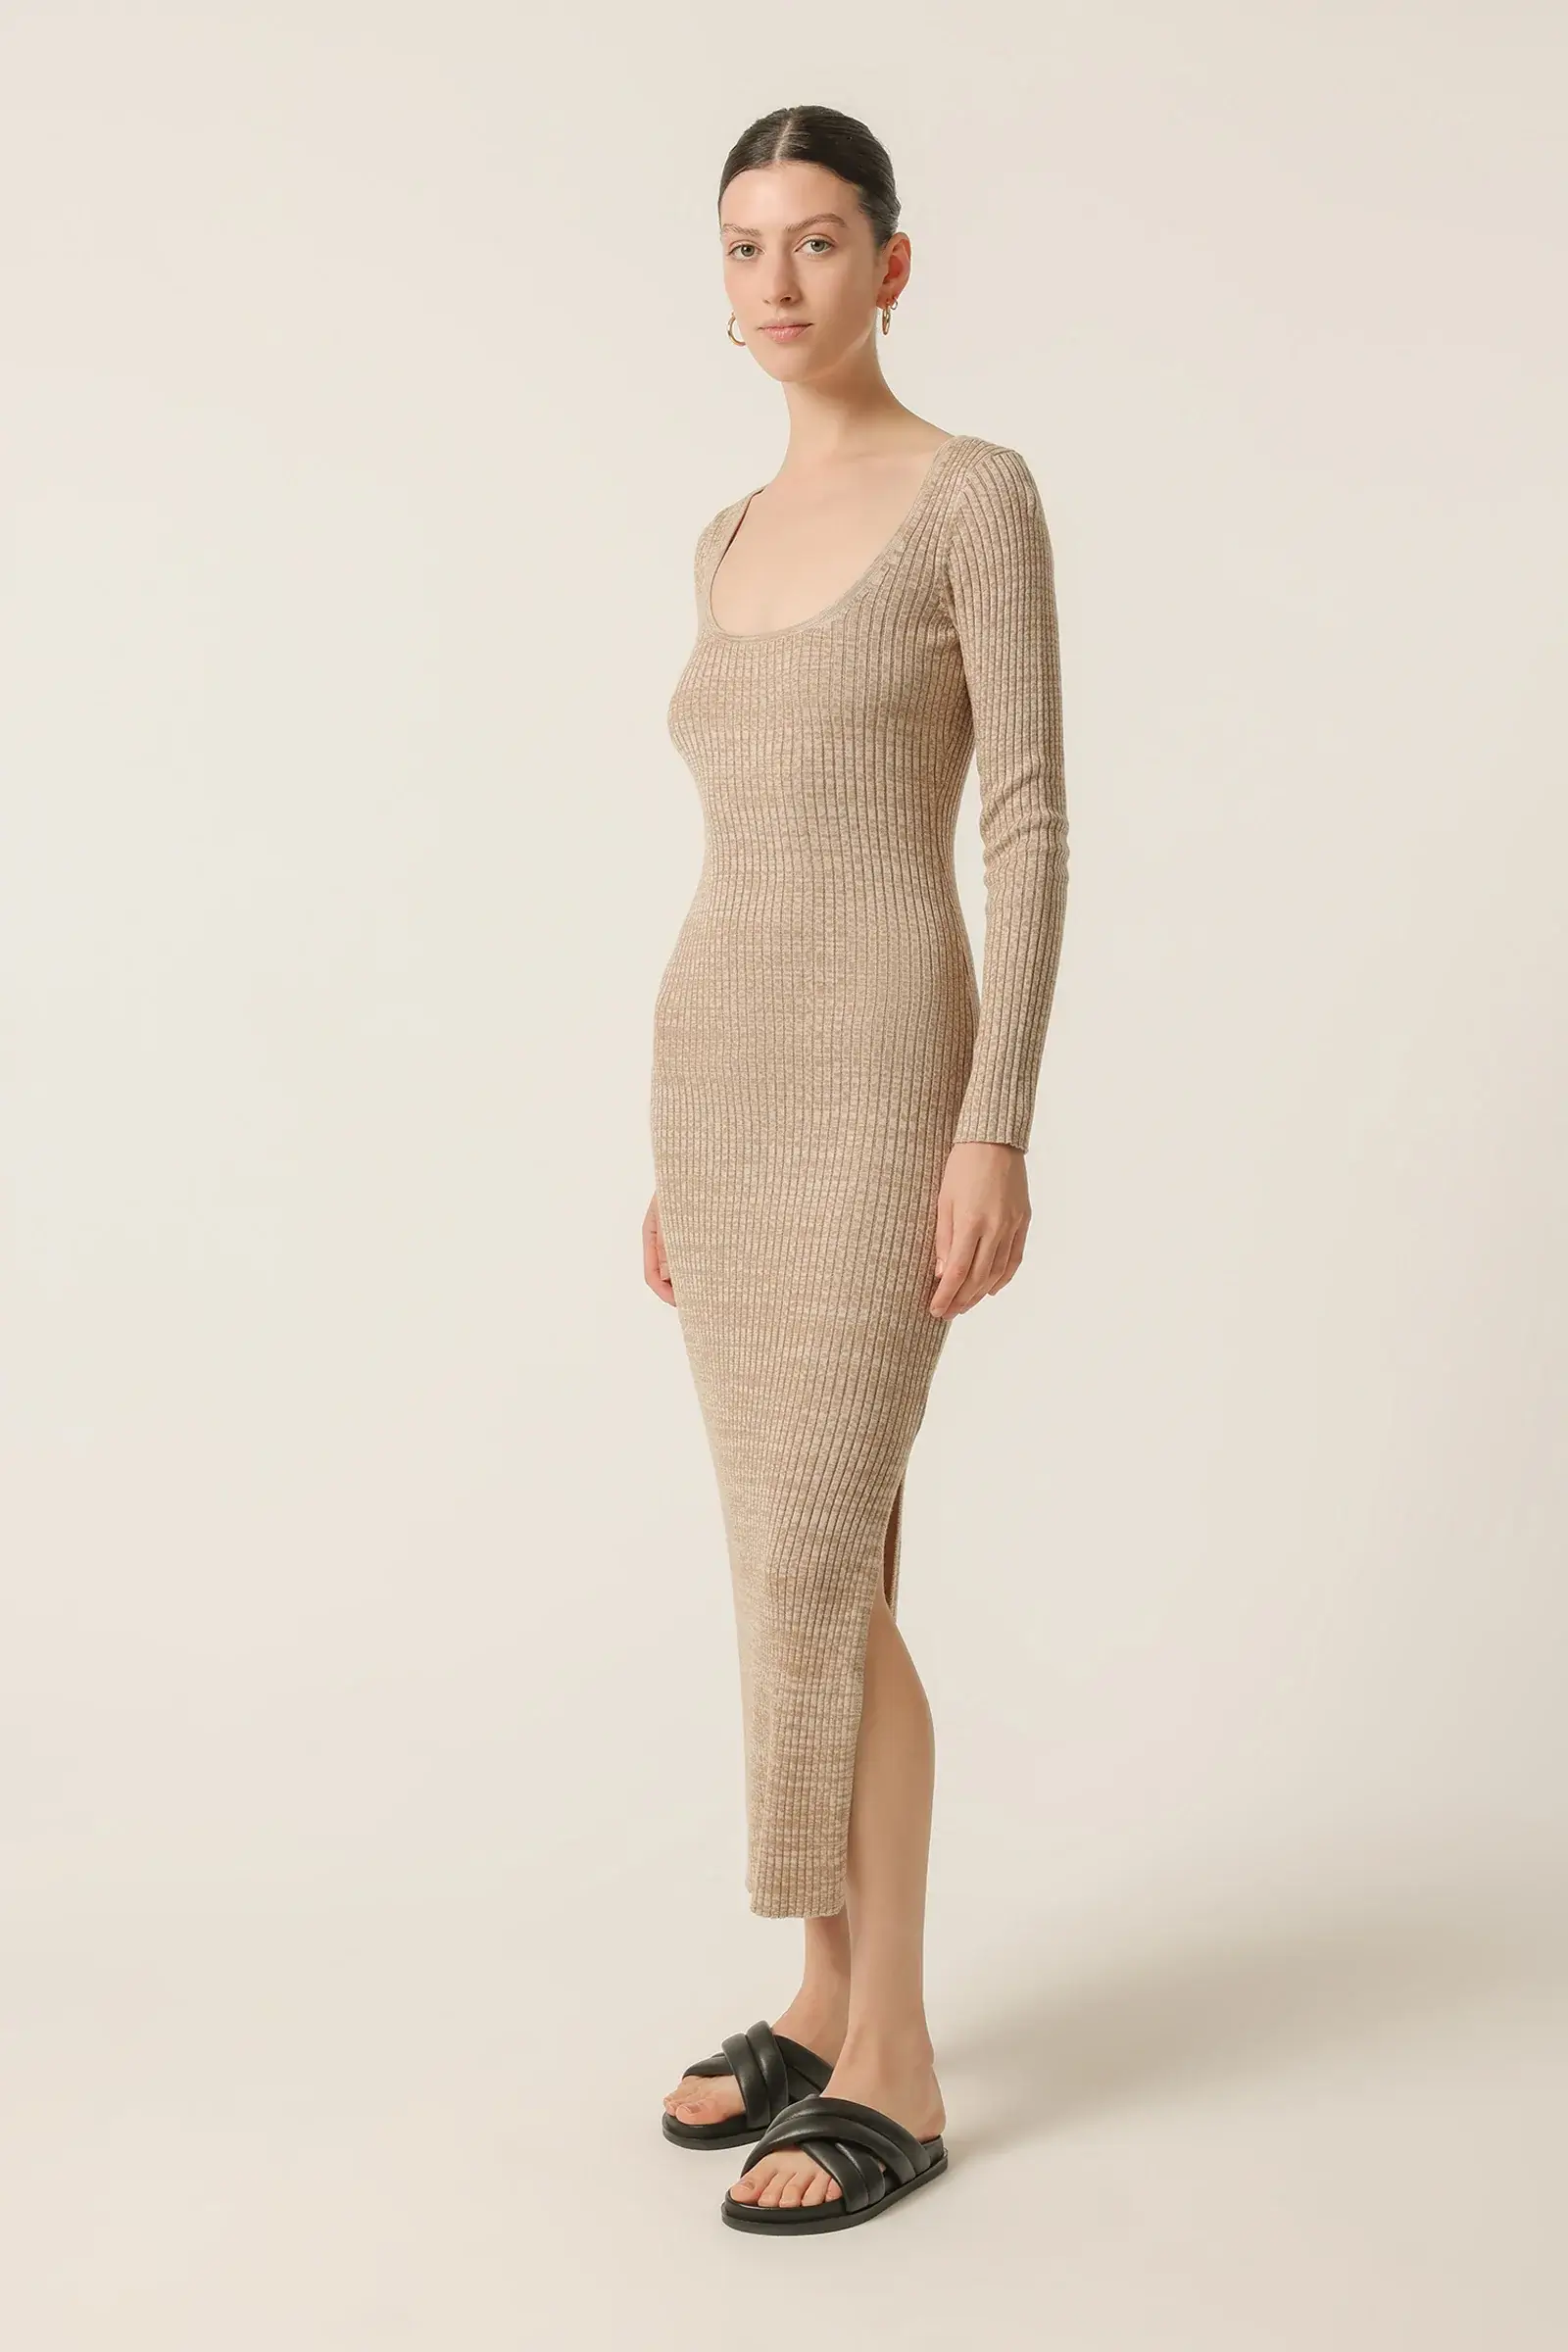 Nude Lucy Paige Knit Dress